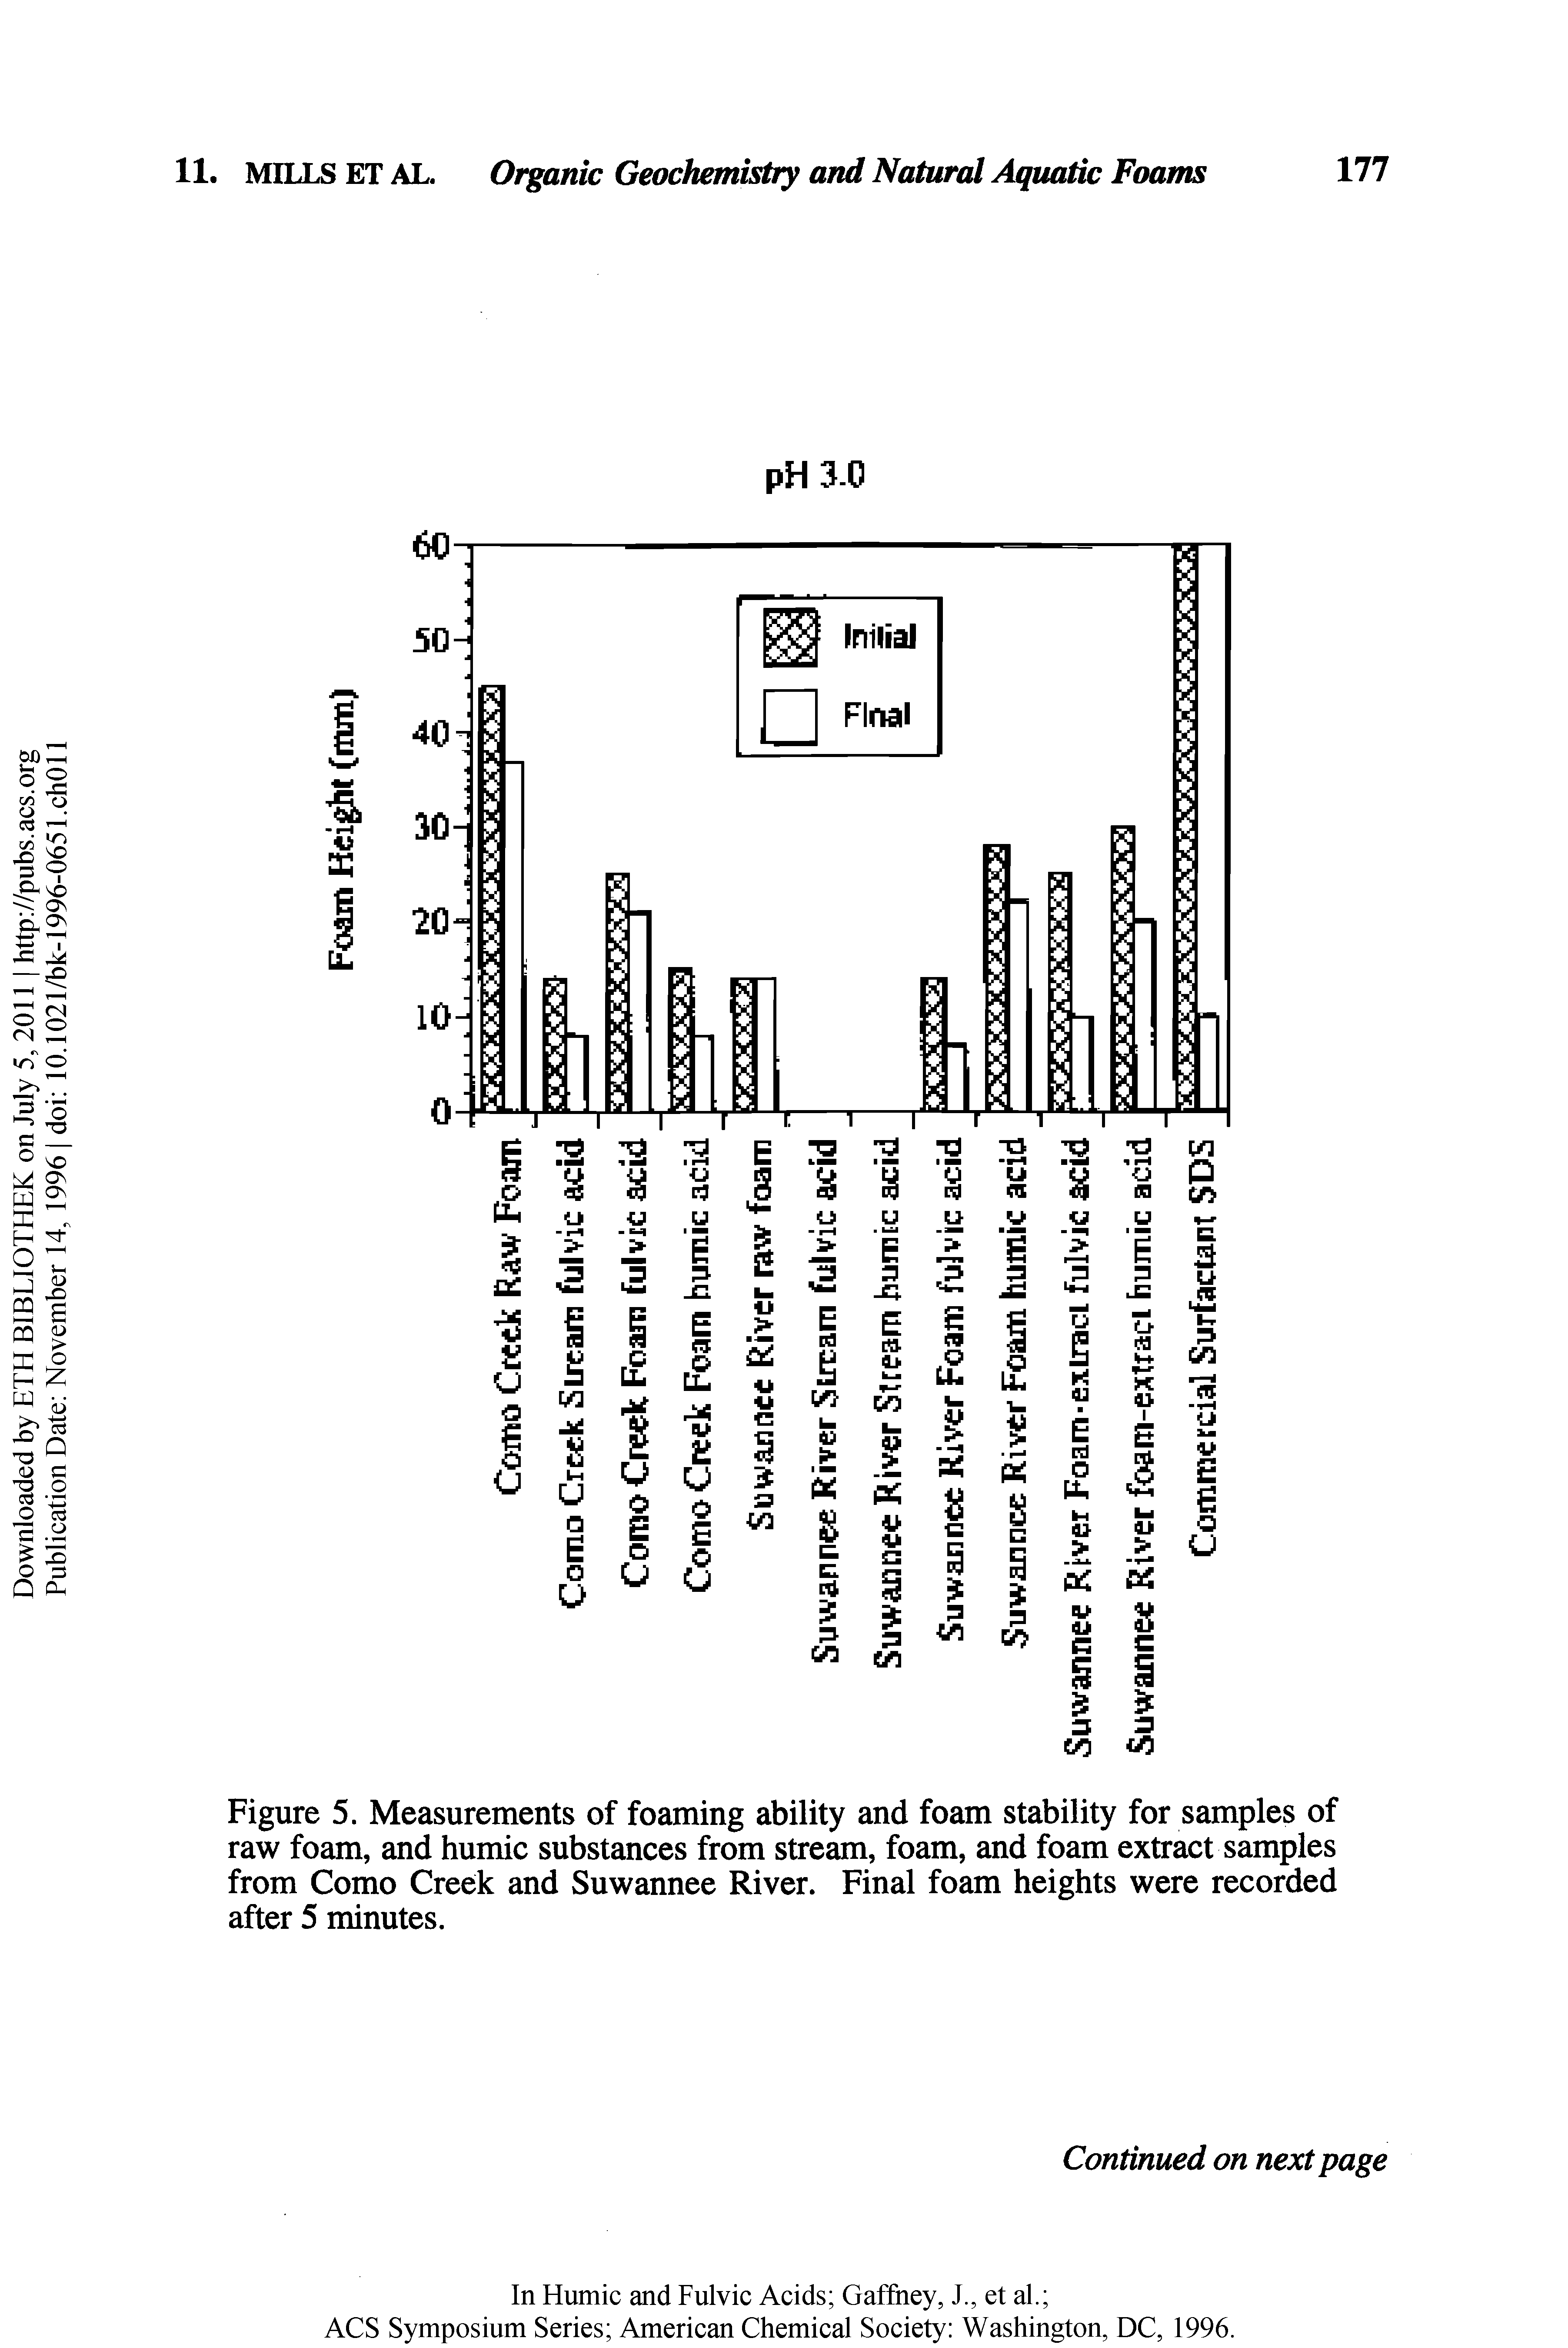 Figure 5. Measurements of foaming ability and foam stability for samples of raw foam, and humic substances from stream, foam, and foam extract samples from Como Creek and Suwannee River. Final foam heights were recorded after 5 minutes.